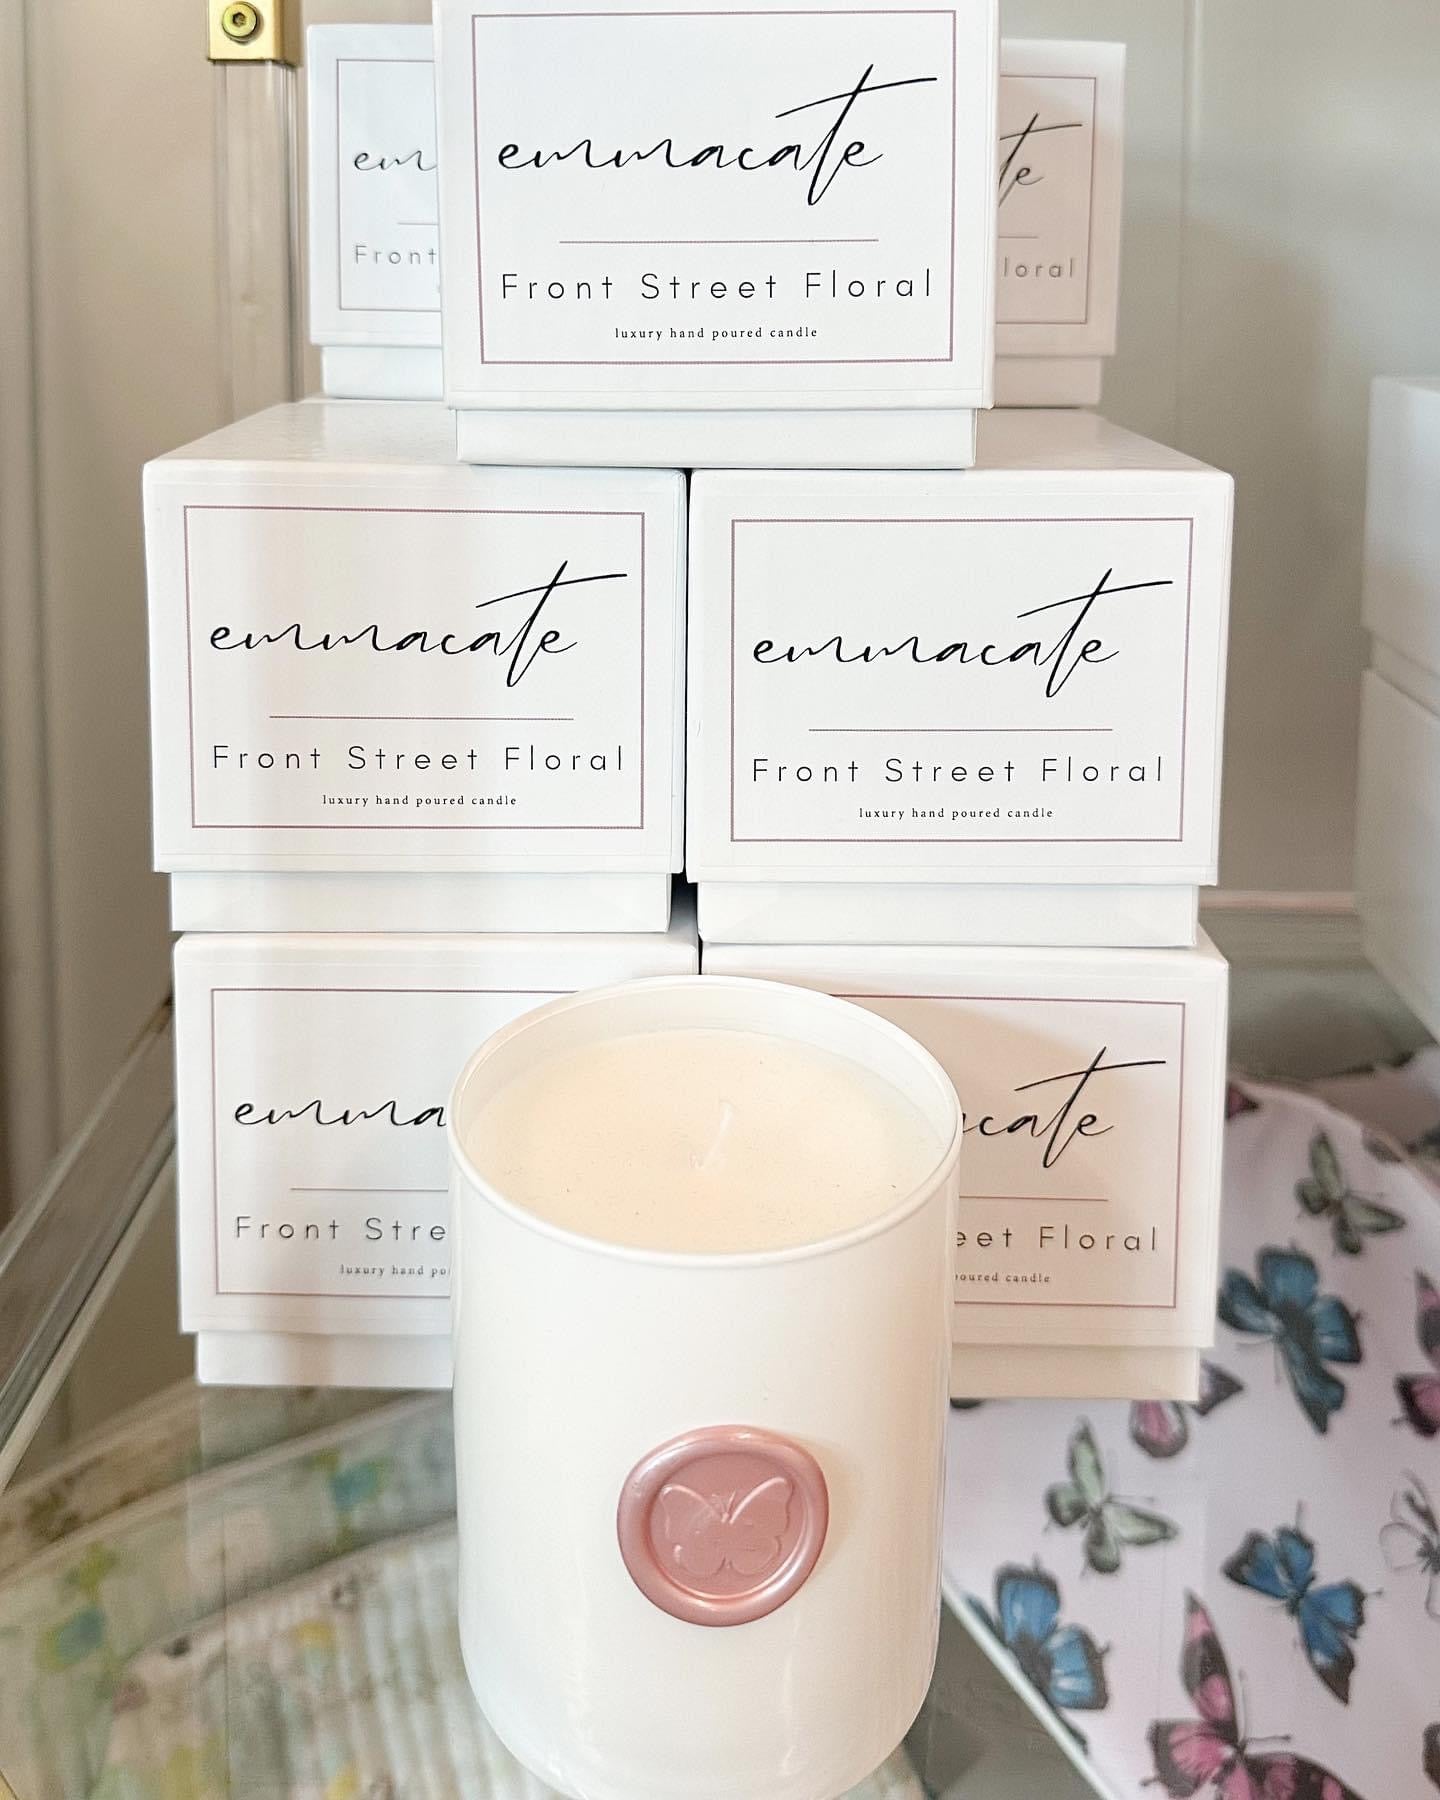 Front Street Floral Candle - Hotel Fresh Scent